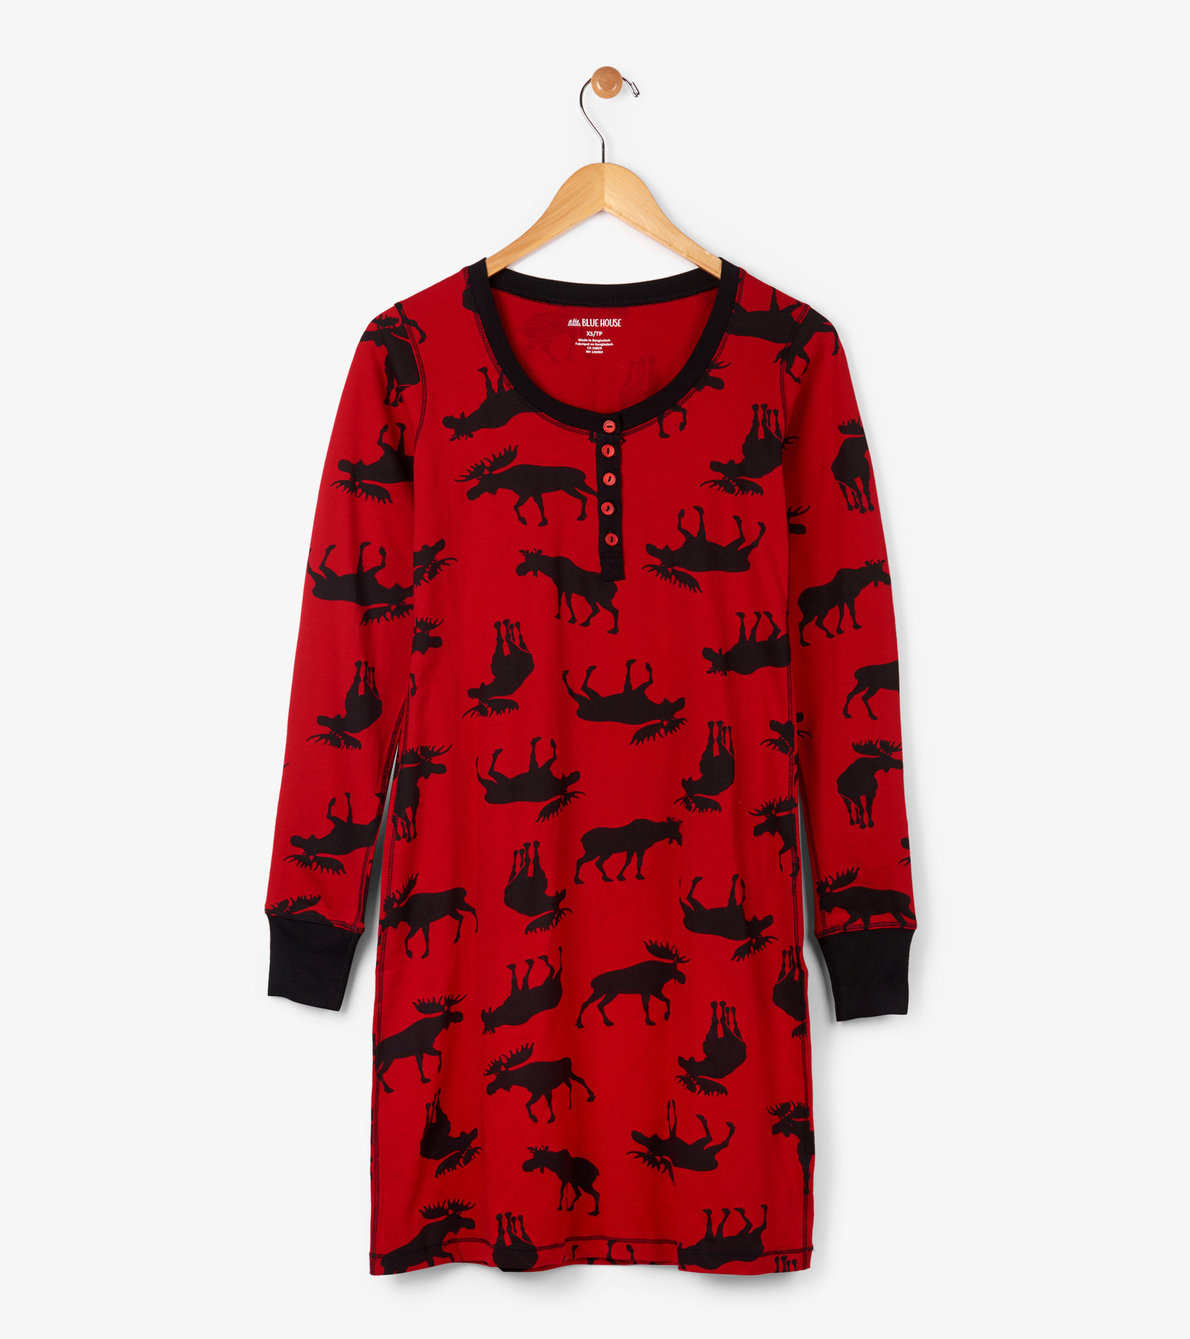 View larger image of Moose on Red Women's Nightdress